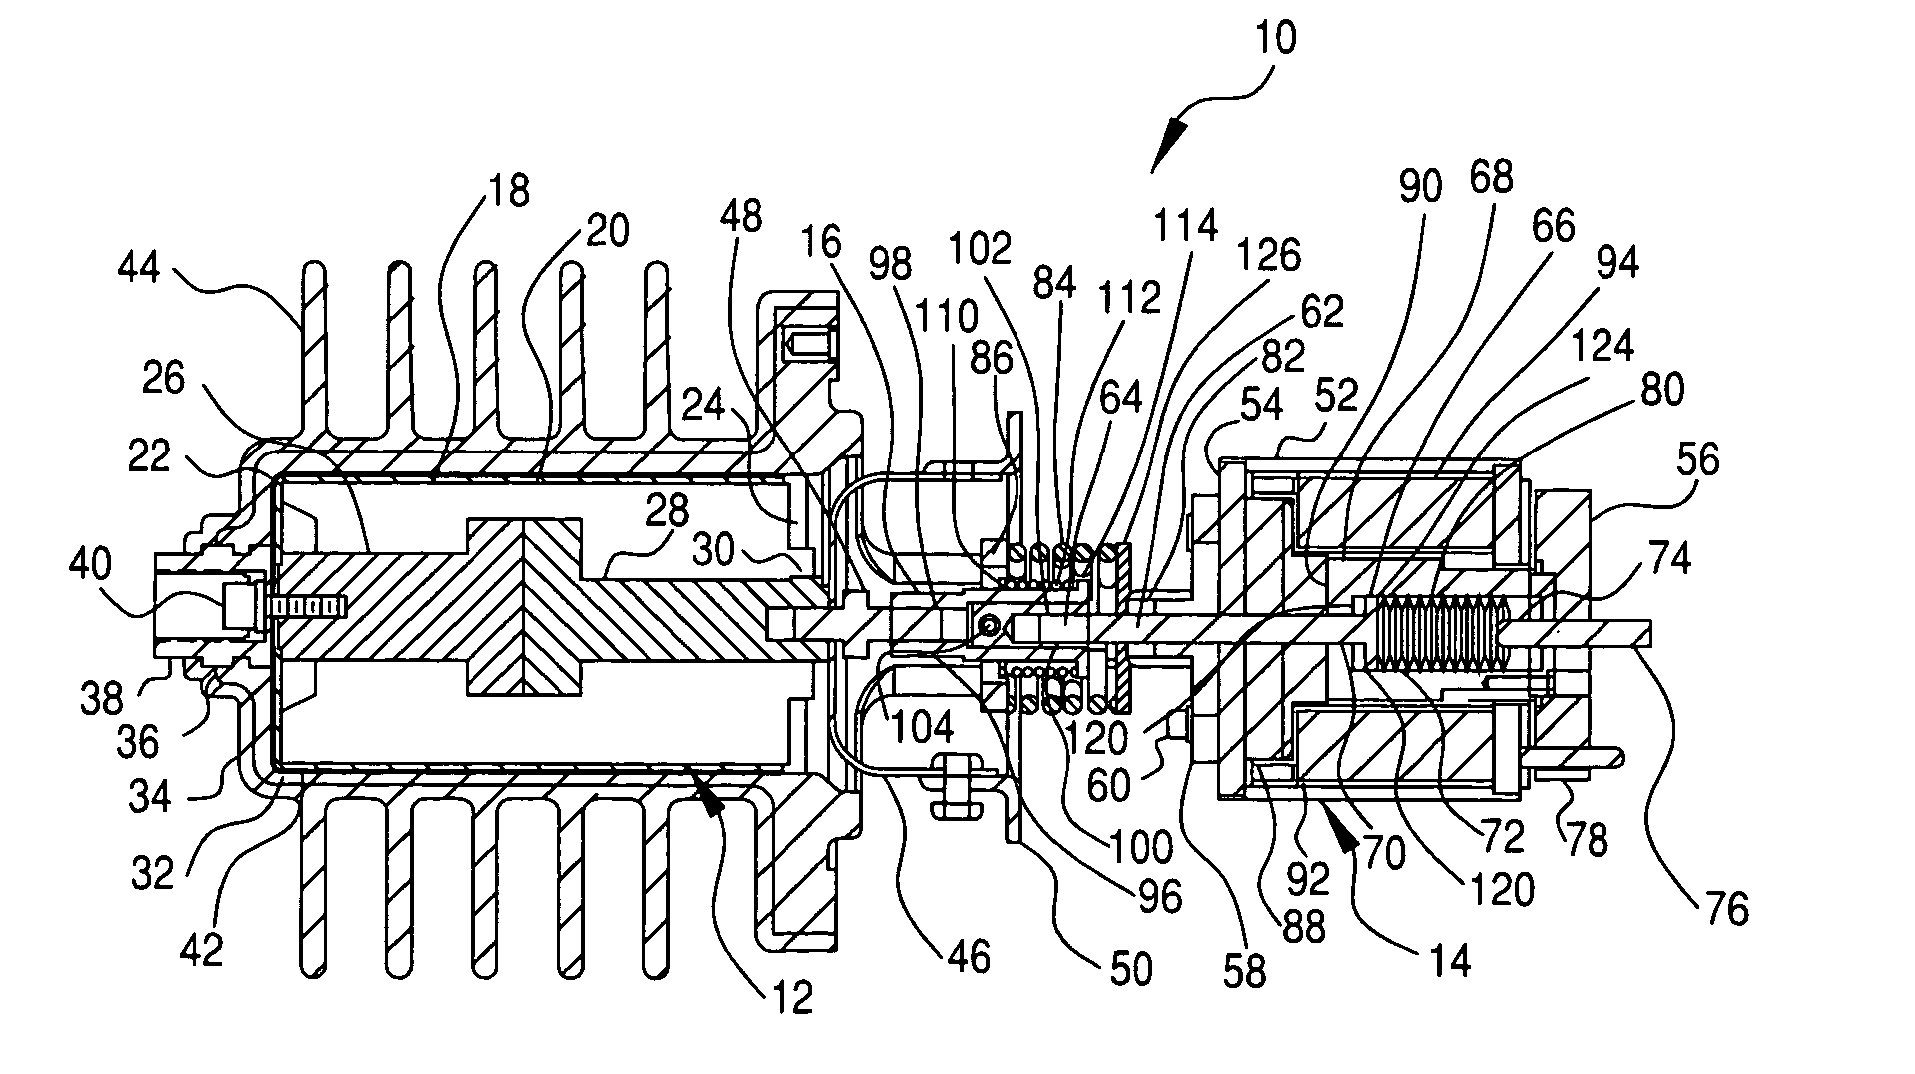 Circuit interrupting device with a turnbuckle and weld break assembly